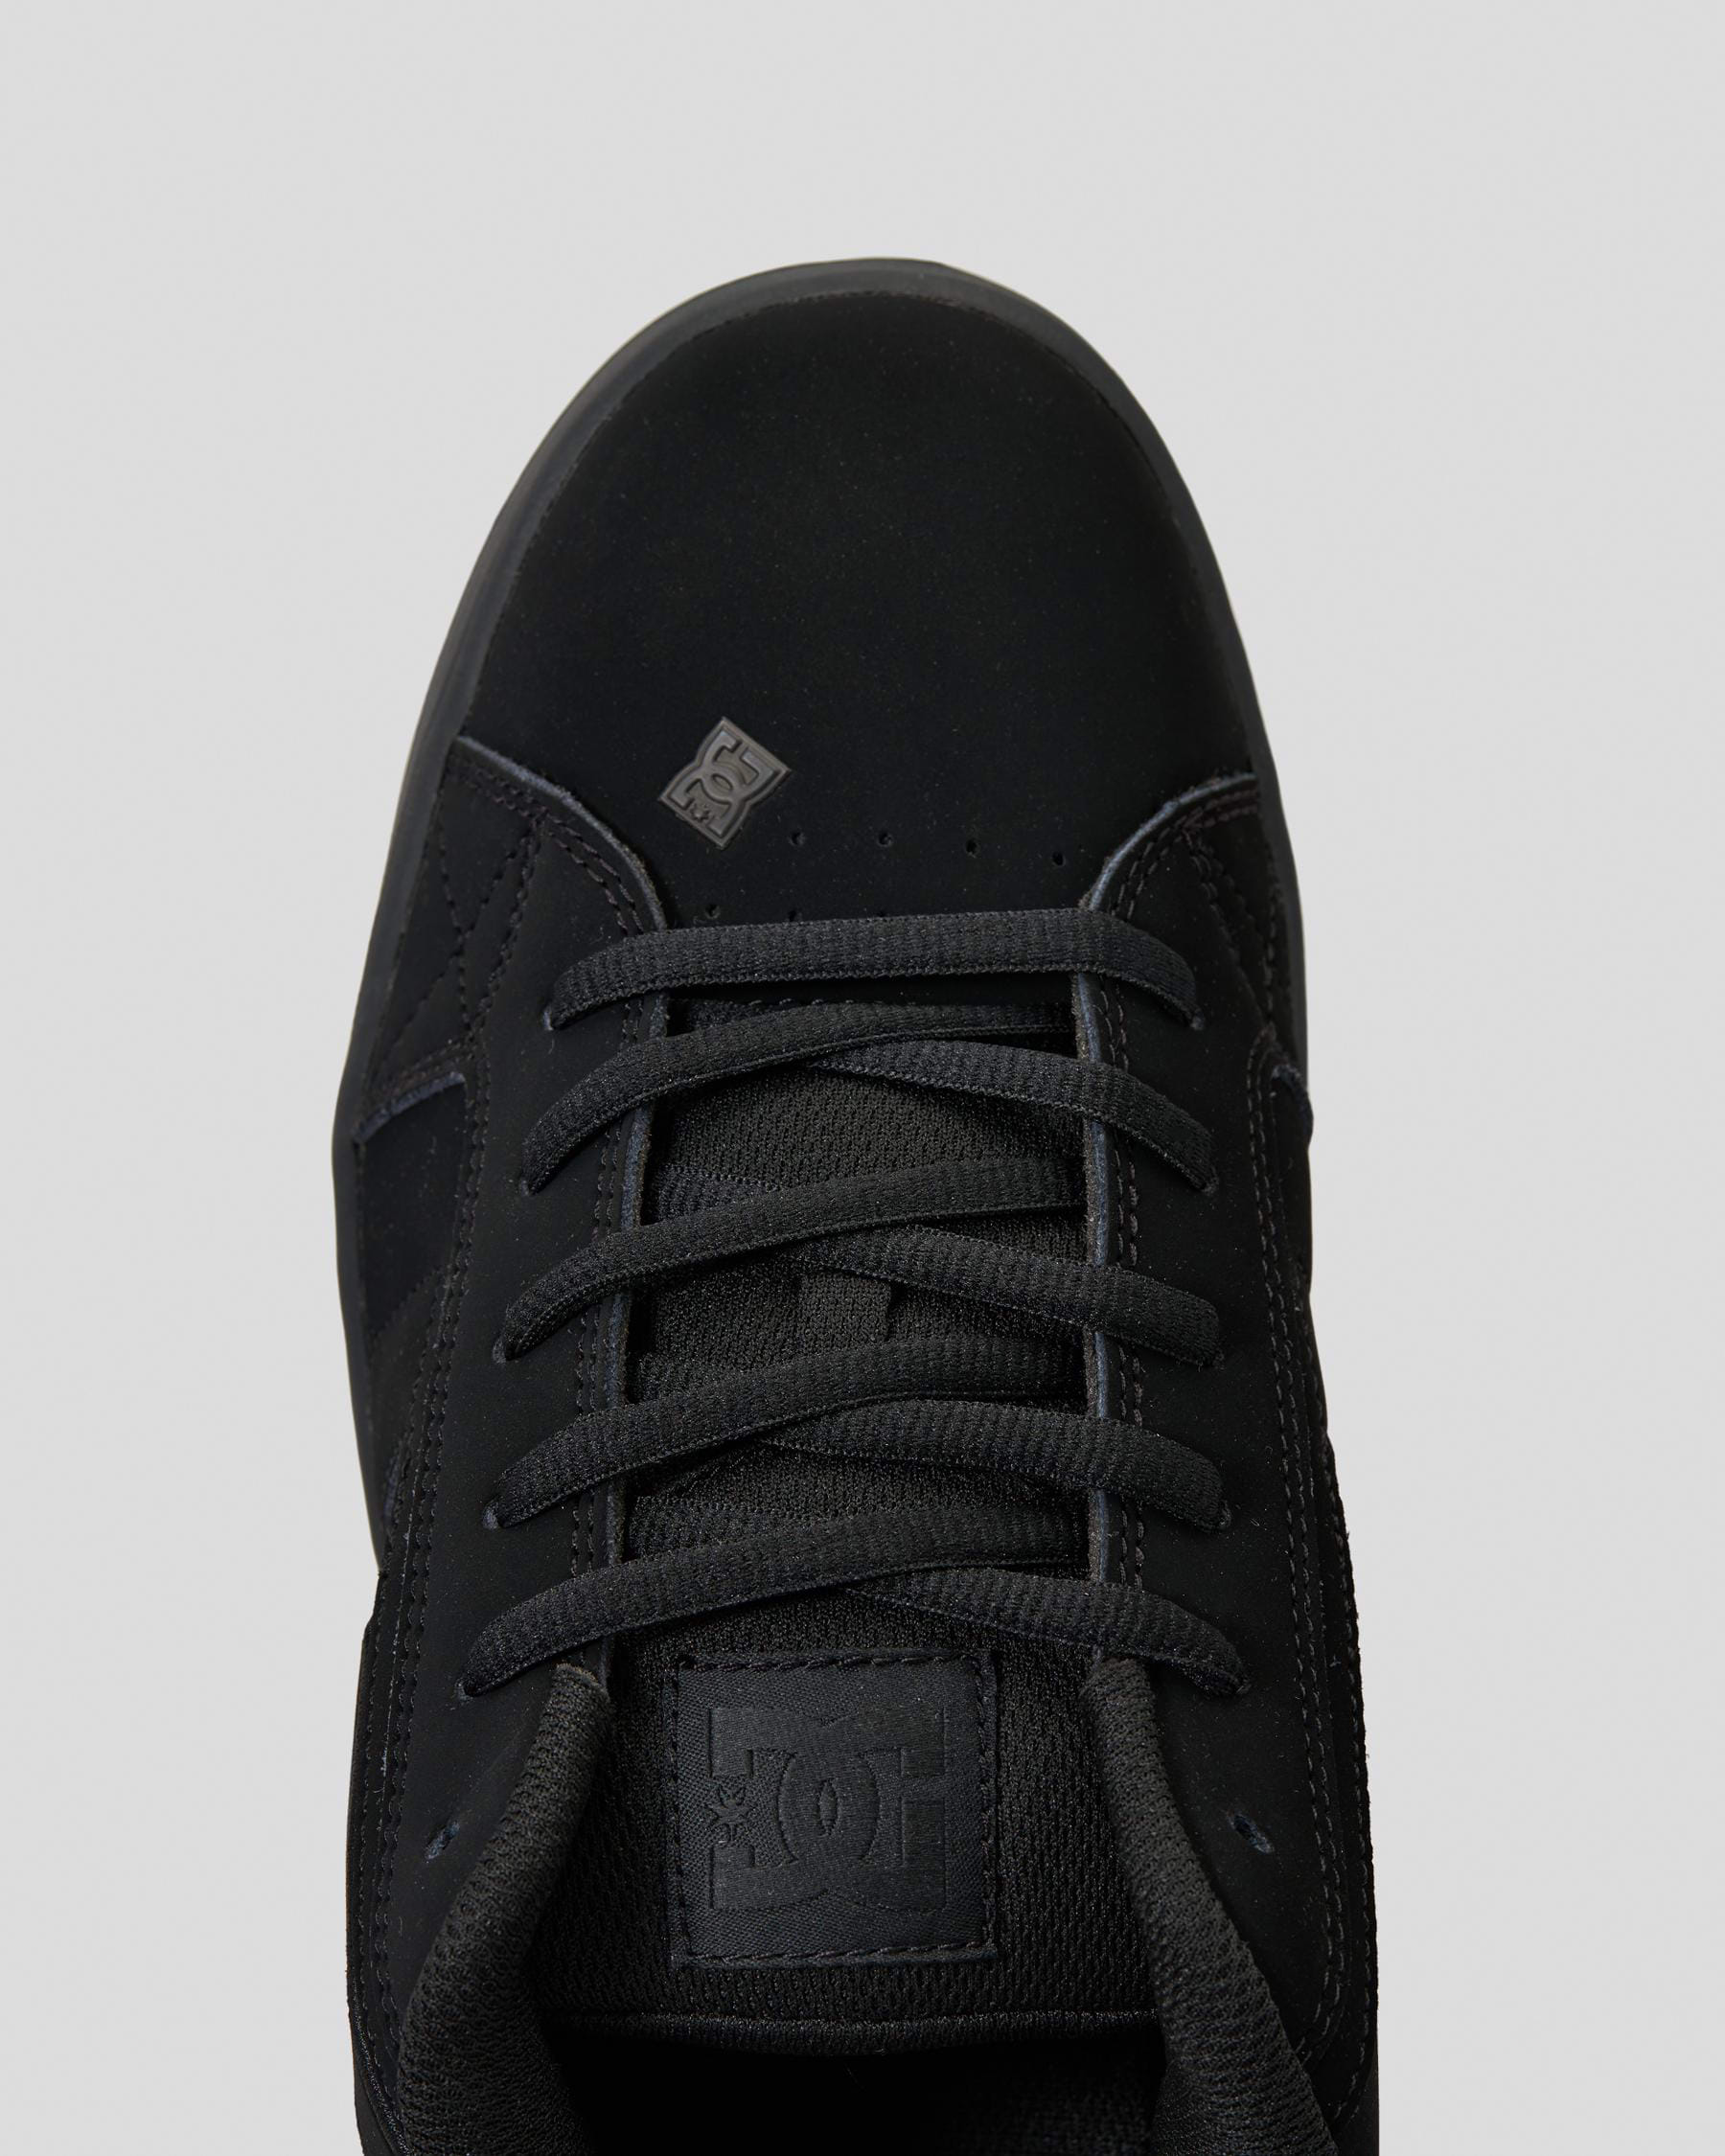 Shop DC Shoes Net Shoes In Black/black/black - Fast Shipping & Easy ...